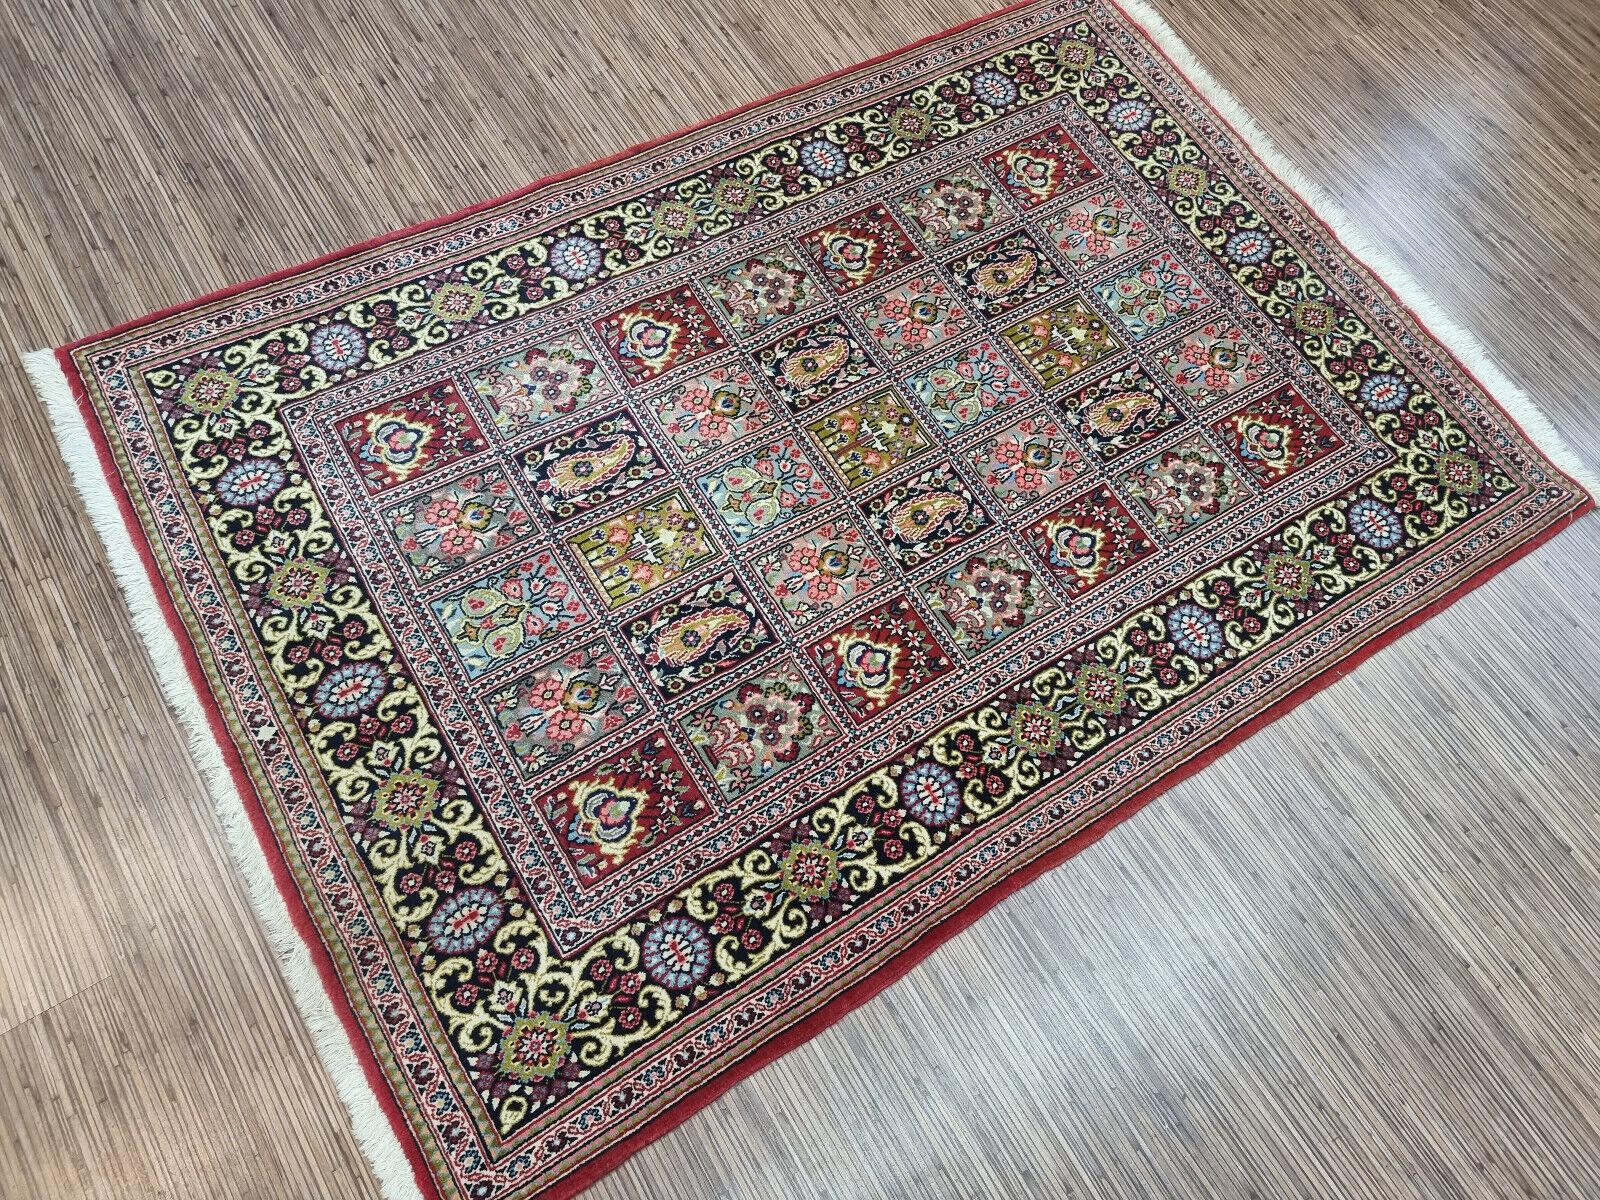 Handmade Vintage Persian Style Qum Rug 3.6' x 5.1', 1970s - 1D87 In Good Condition For Sale In Bordeaux, FR